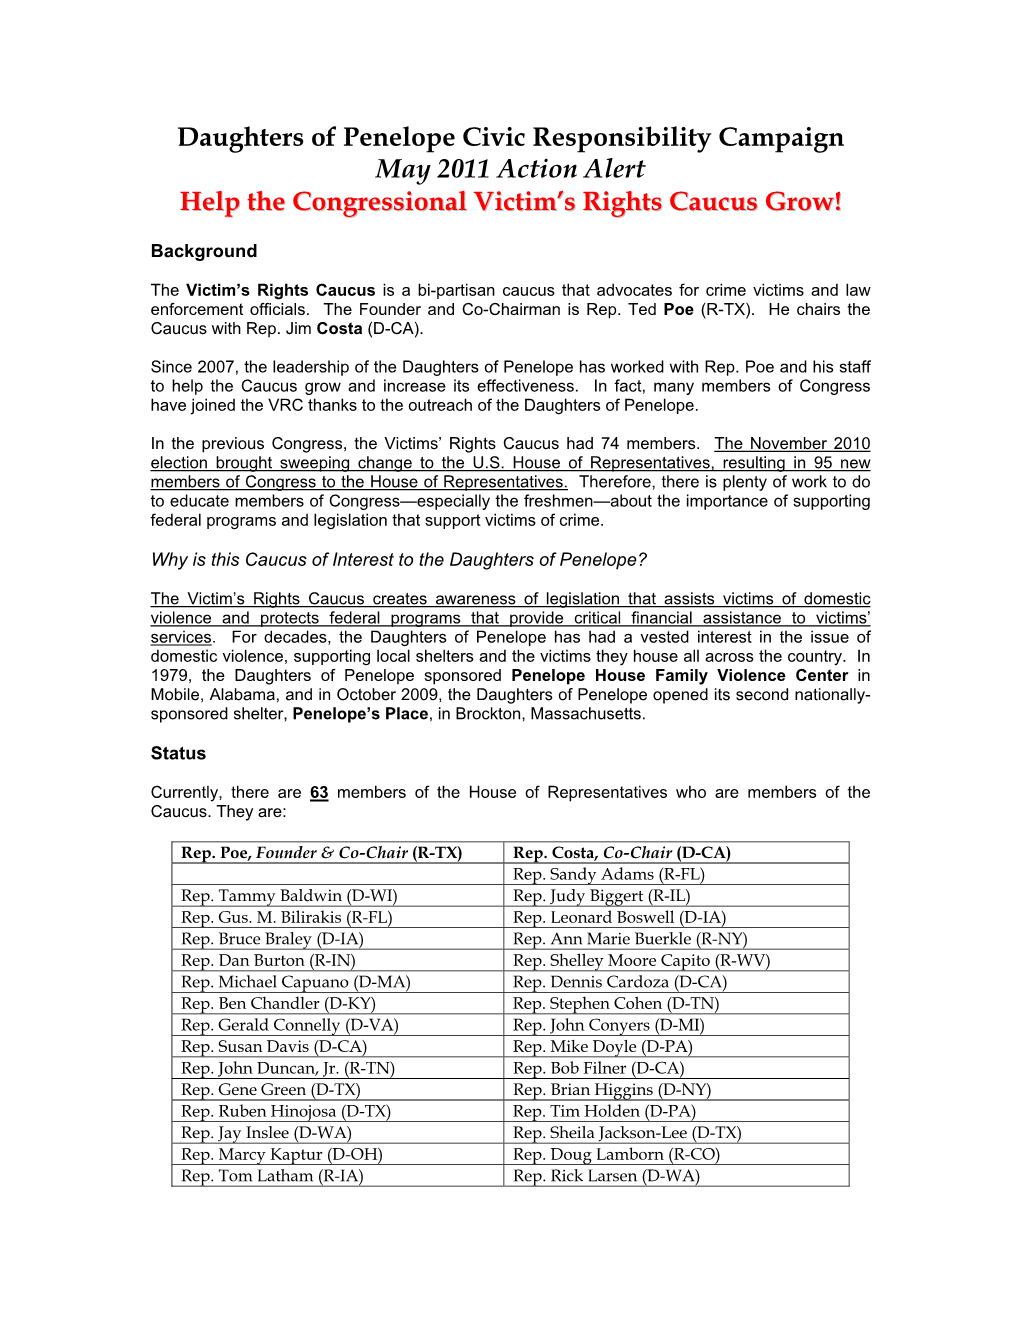 Daughters of Penelope Civic Responsibility Campaign May 2011 Action Alert Help the Congressional Victim’S Rights Caucus Grow!